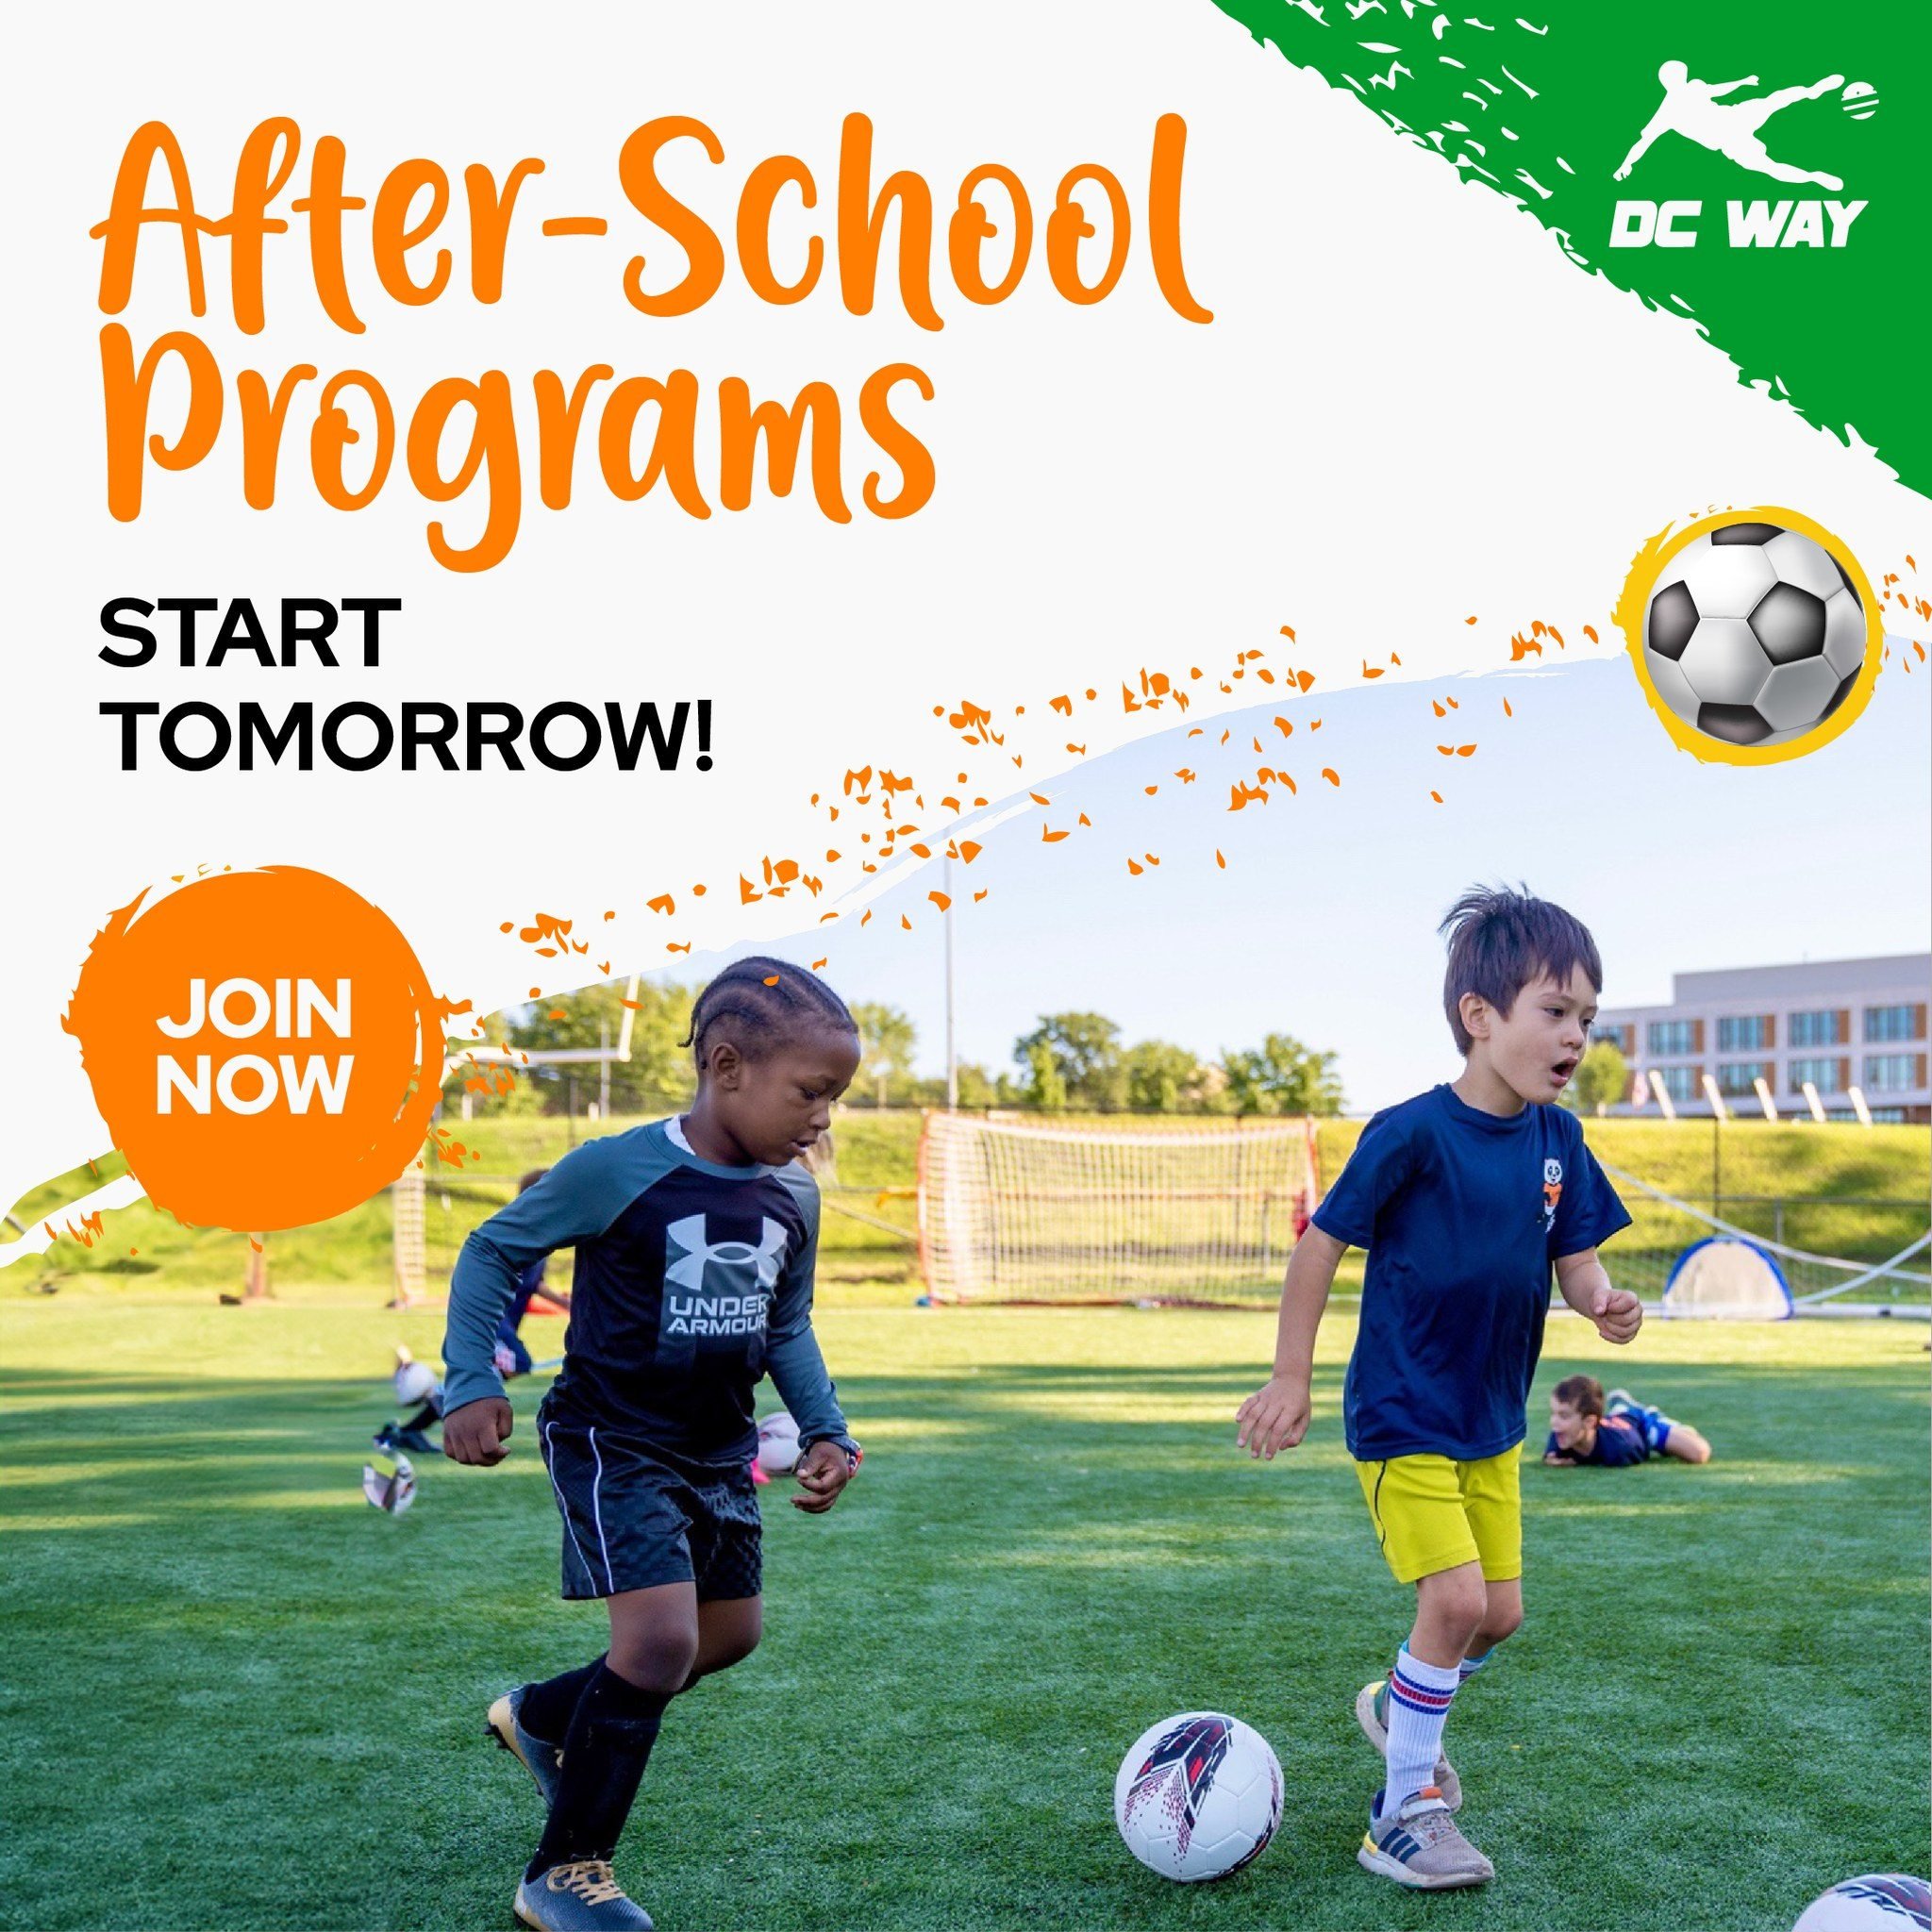 Are you ready to transform after-school hours into exhilarating soccer adventures? 🌟 Longing for your child to unwind and have a blast after a busy day at school?  Look no further! 🙌

Our After-School Programs begin TOMORROW! We offer unmatched soc